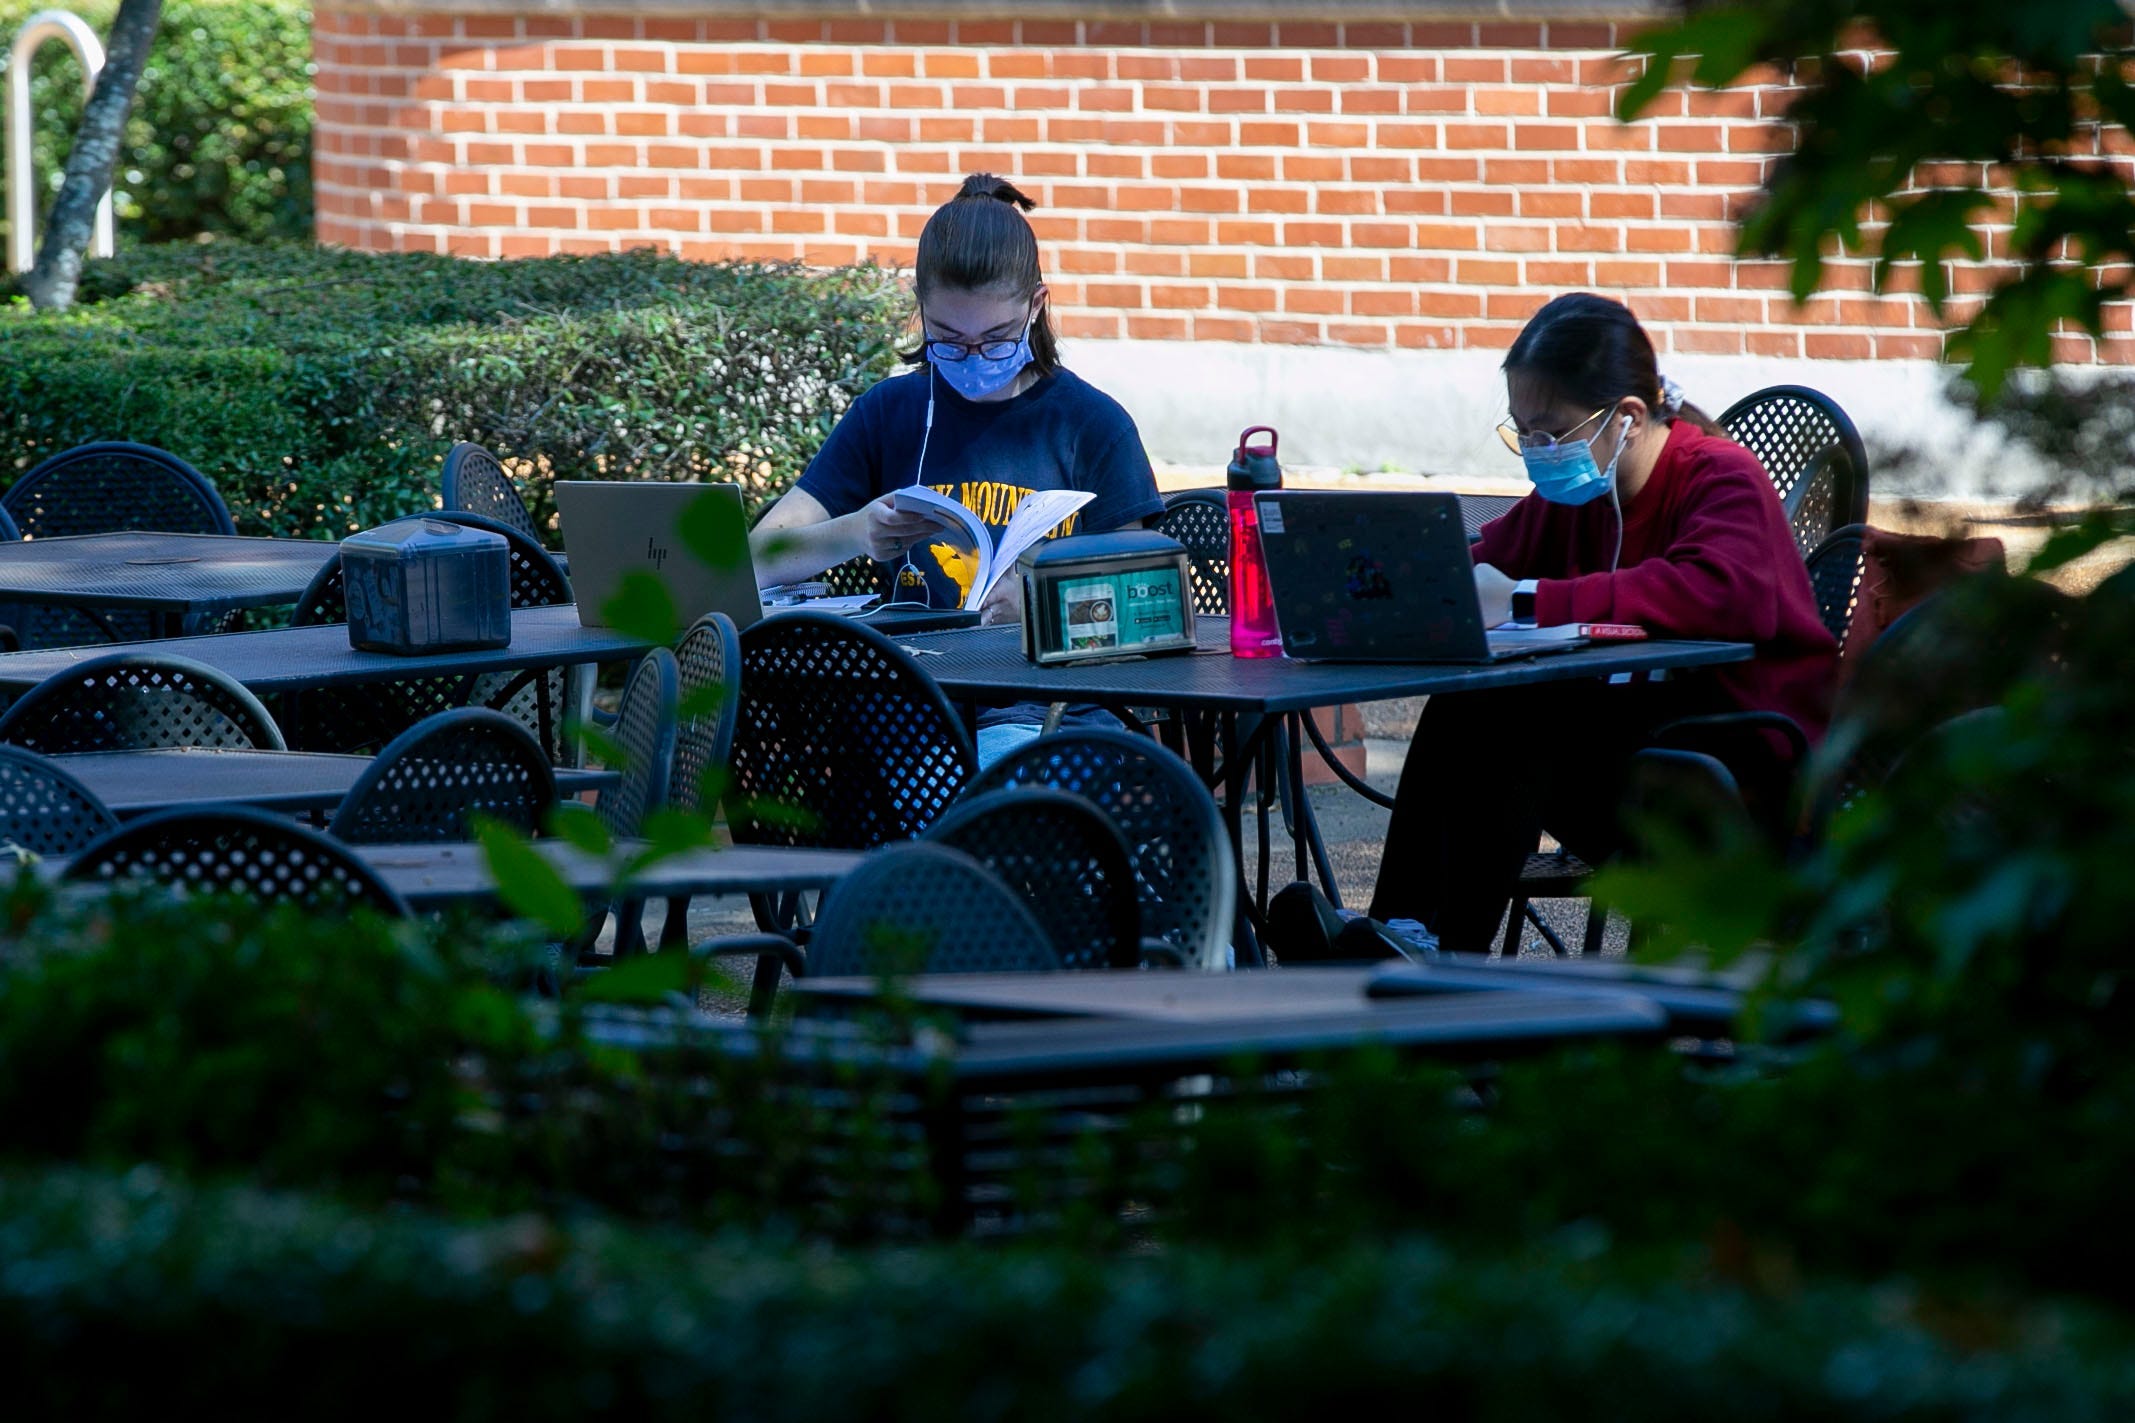 Freshmen Virginia Hensley, left, and Krystel Matutino study in a courtyard after an architecture class on Monday, Aug. 24, 2020, on the University of Memphis campus. While Hensley, who is from Memphis, and Matutino, who is from Bartlett, are completing mostly online courses, the two find it easier to study and focus out being out of the house. "This might be the most campus experience we have this semester," Matutino said.